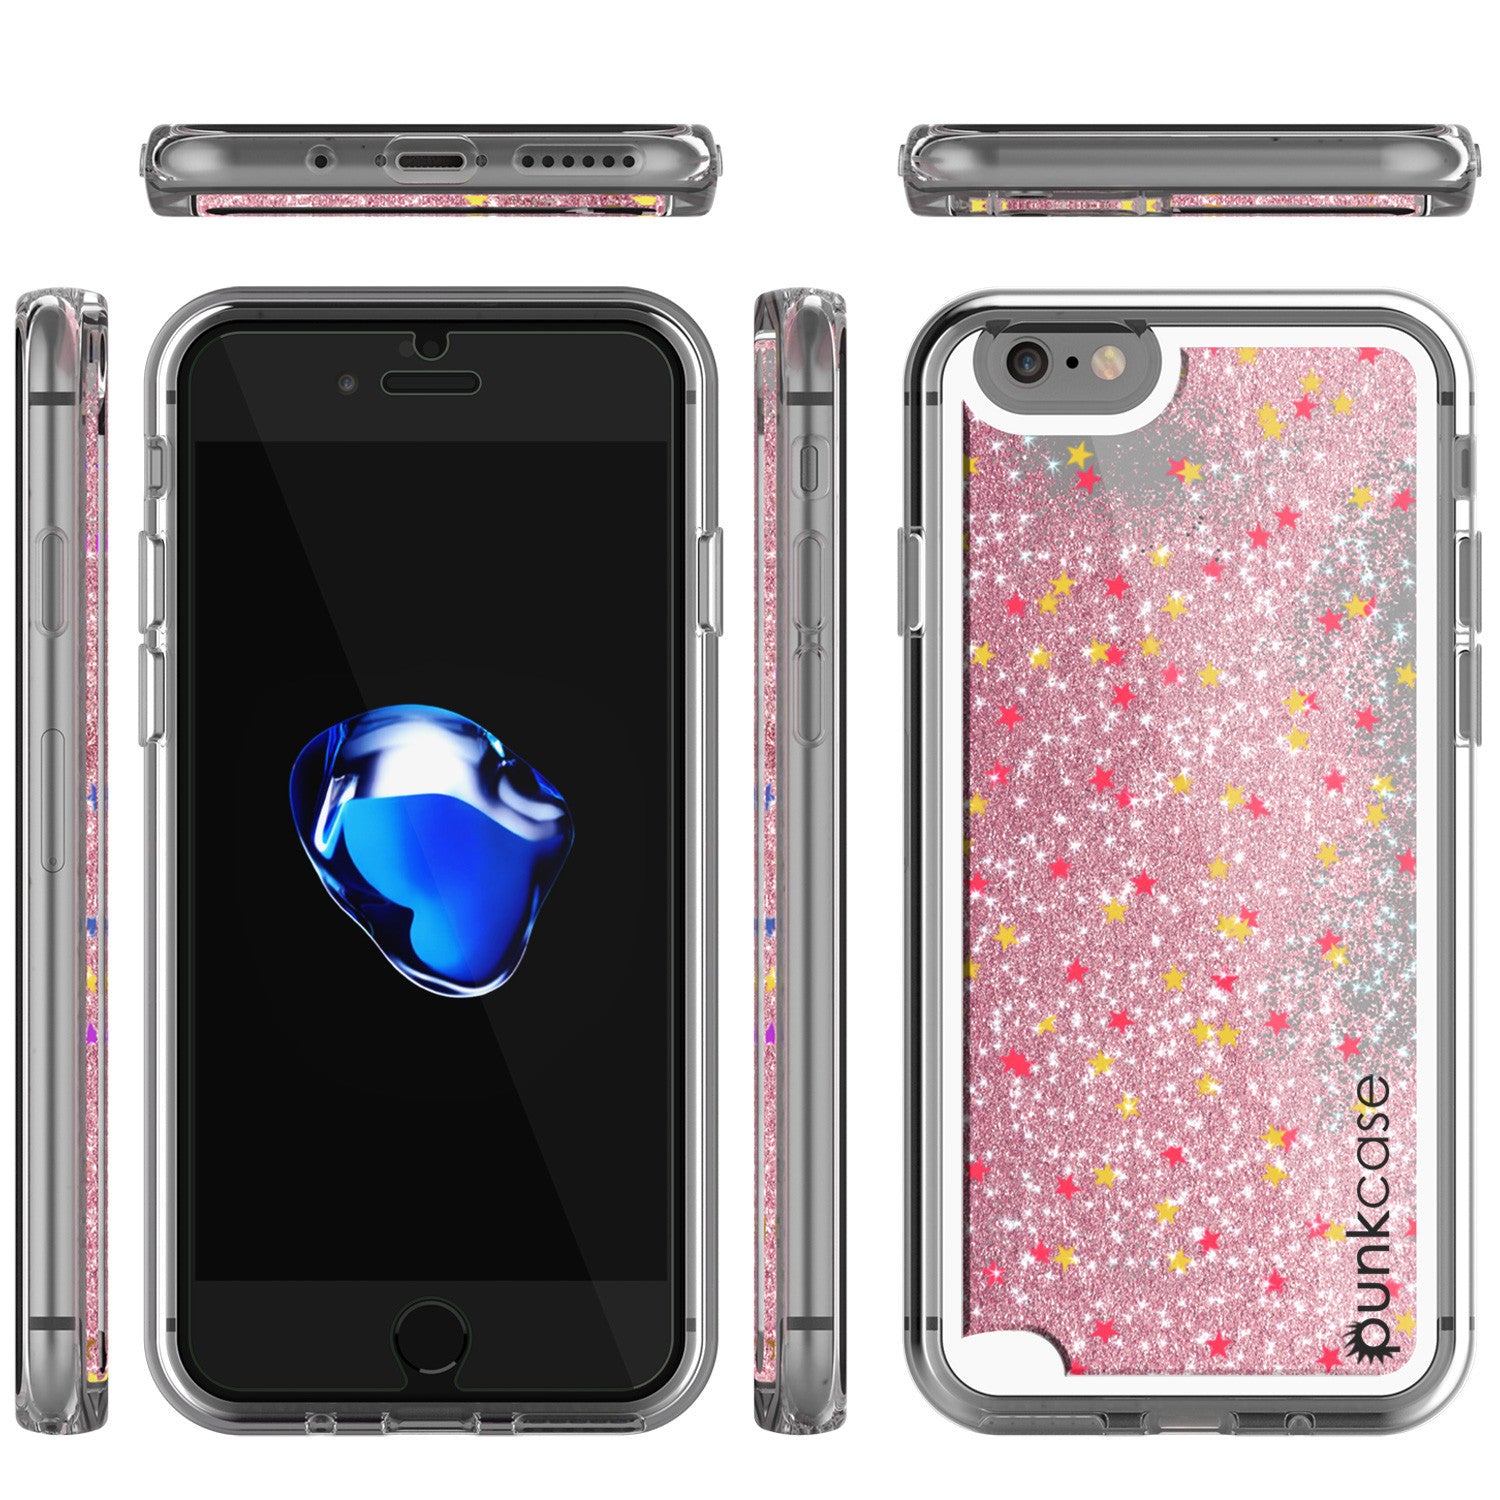 iPhone 7 Case, PunkCase LIQUID Rose Series, Protective Dual Layer Floating Glitter Cover